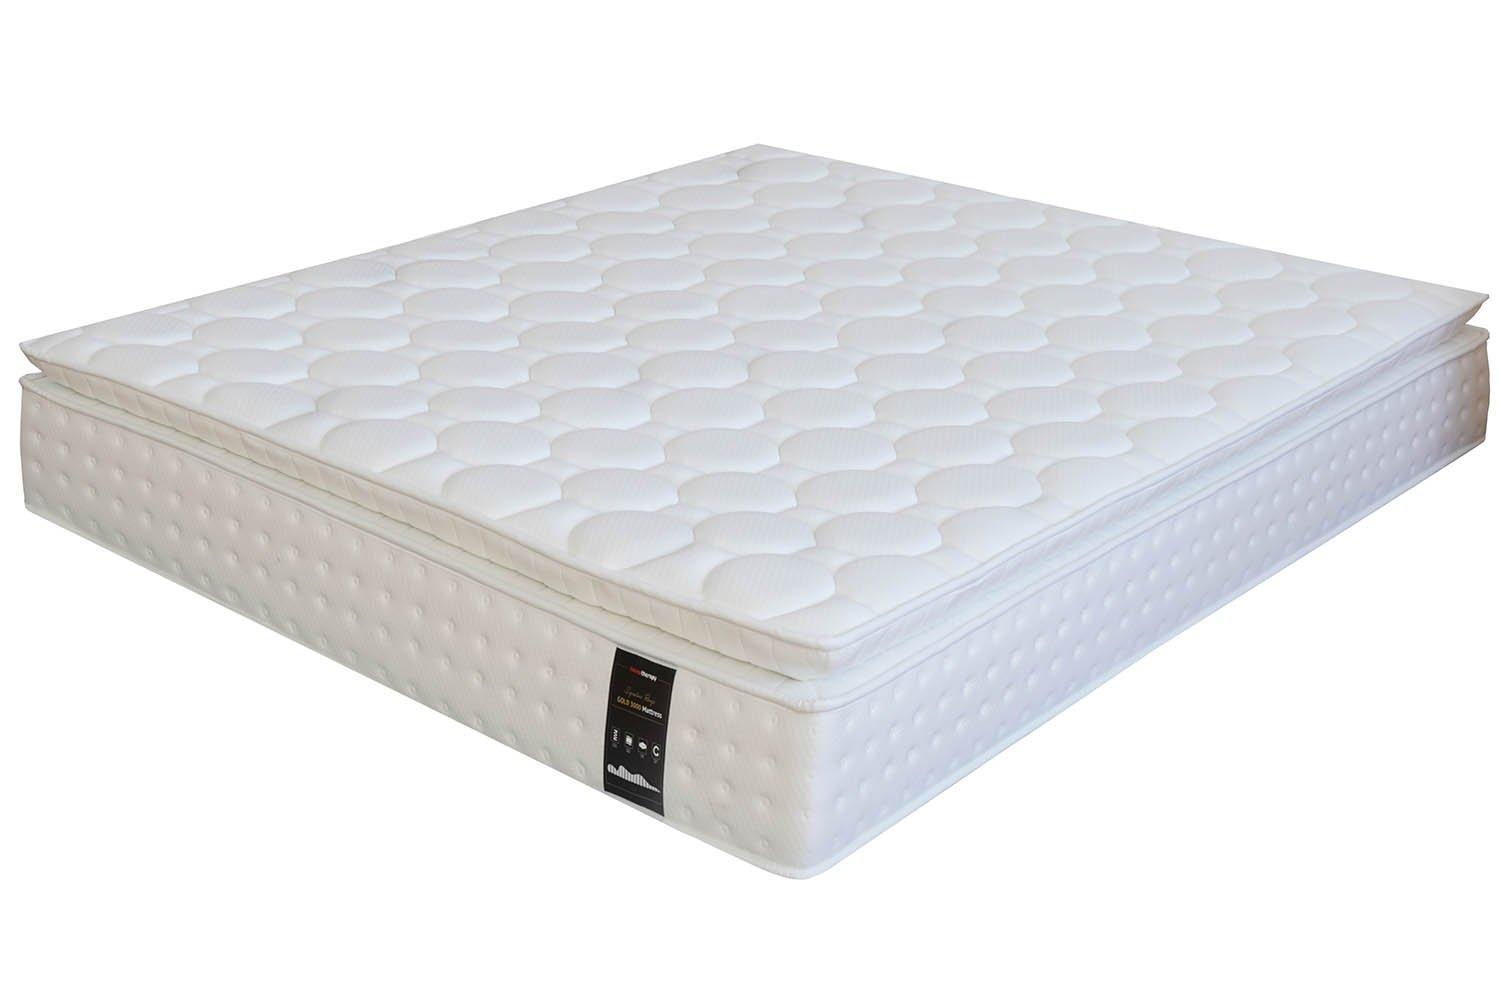 Gold 3000 5 Zone Foam Encapsulated Knitted Cover Pocket Spring Mattress